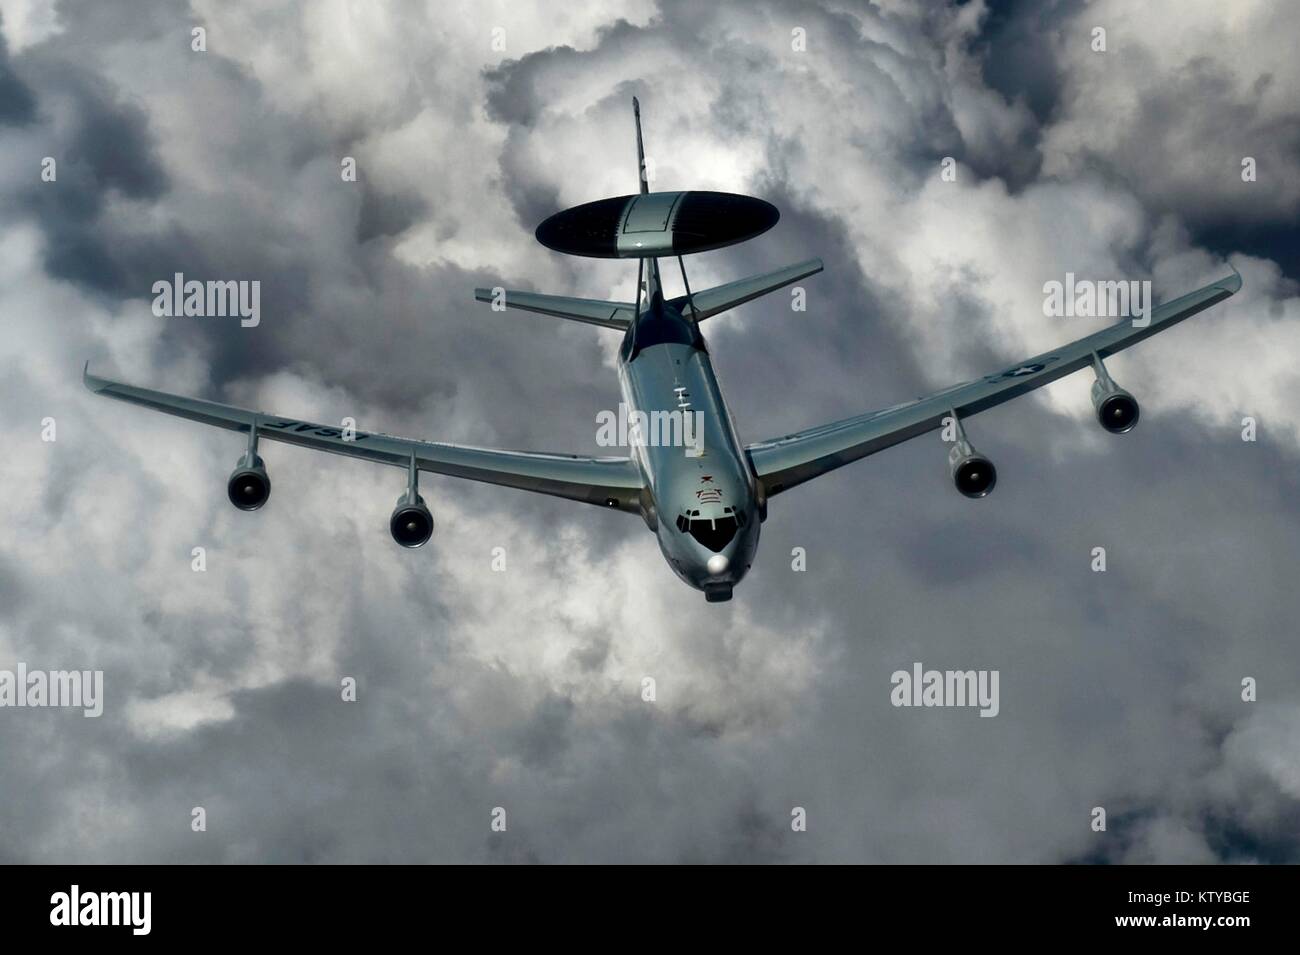 A U.S. Air Force E-3 Sentry aircraft flies over the Nellis Air Force Base Nevada Test and Training Range during exercise Red Flag July 20, 2012 near Las Vegas, Nevada. Stock Photo